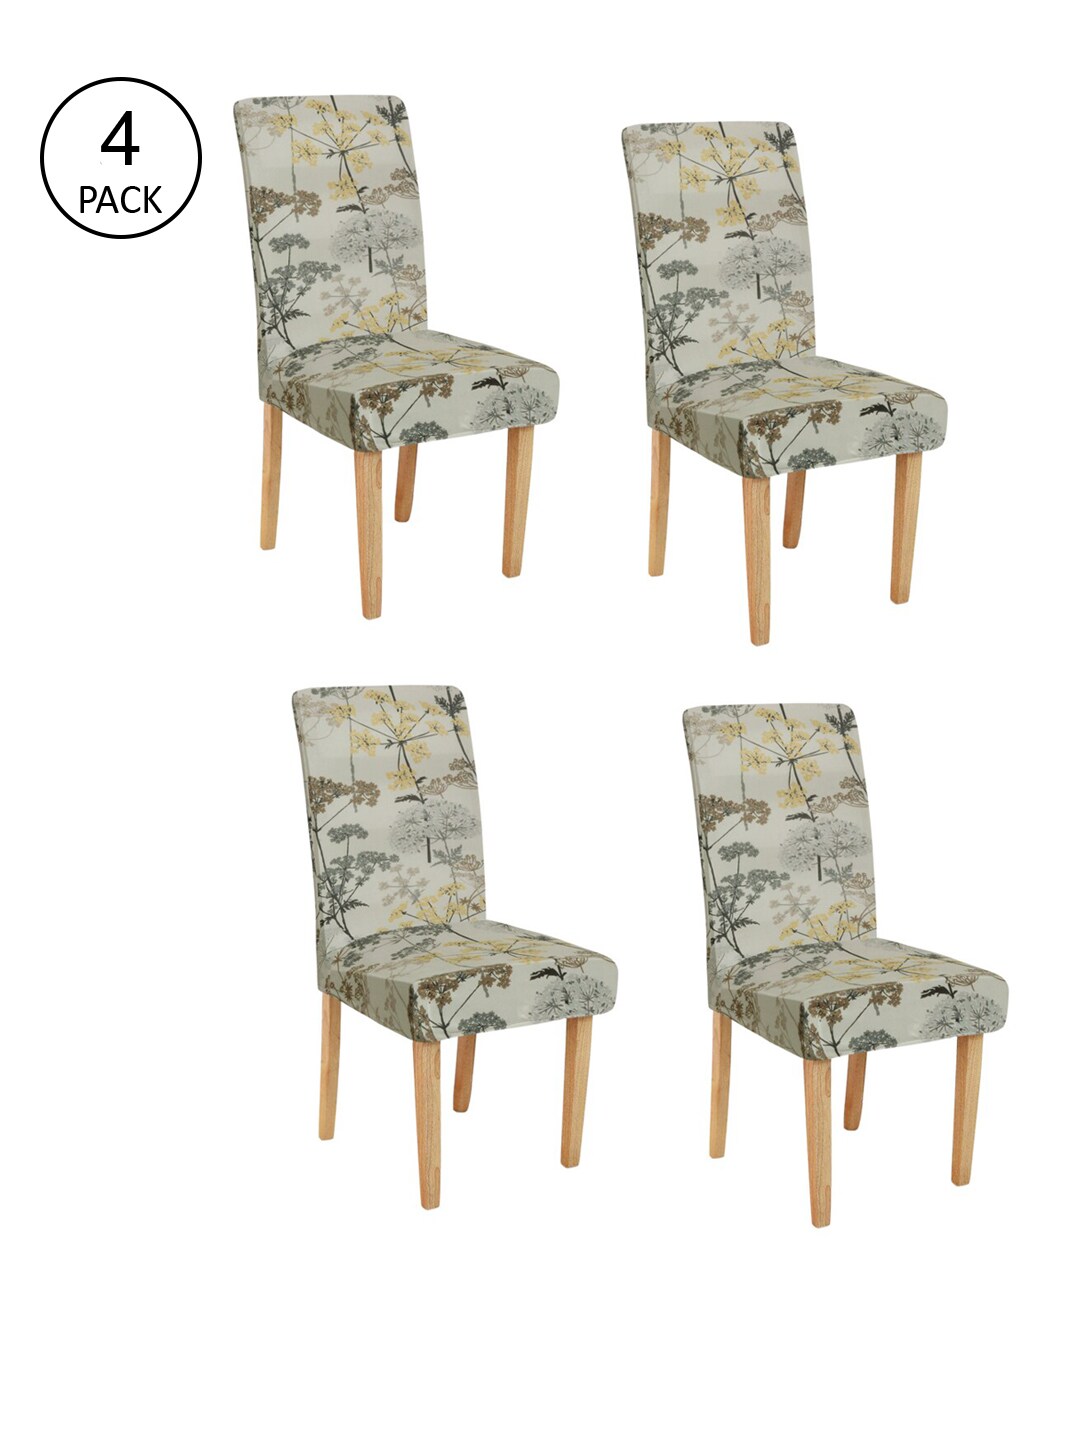 Rajasthan Decor Set Of 4 White & Brown Printed Chair Covers Price in India